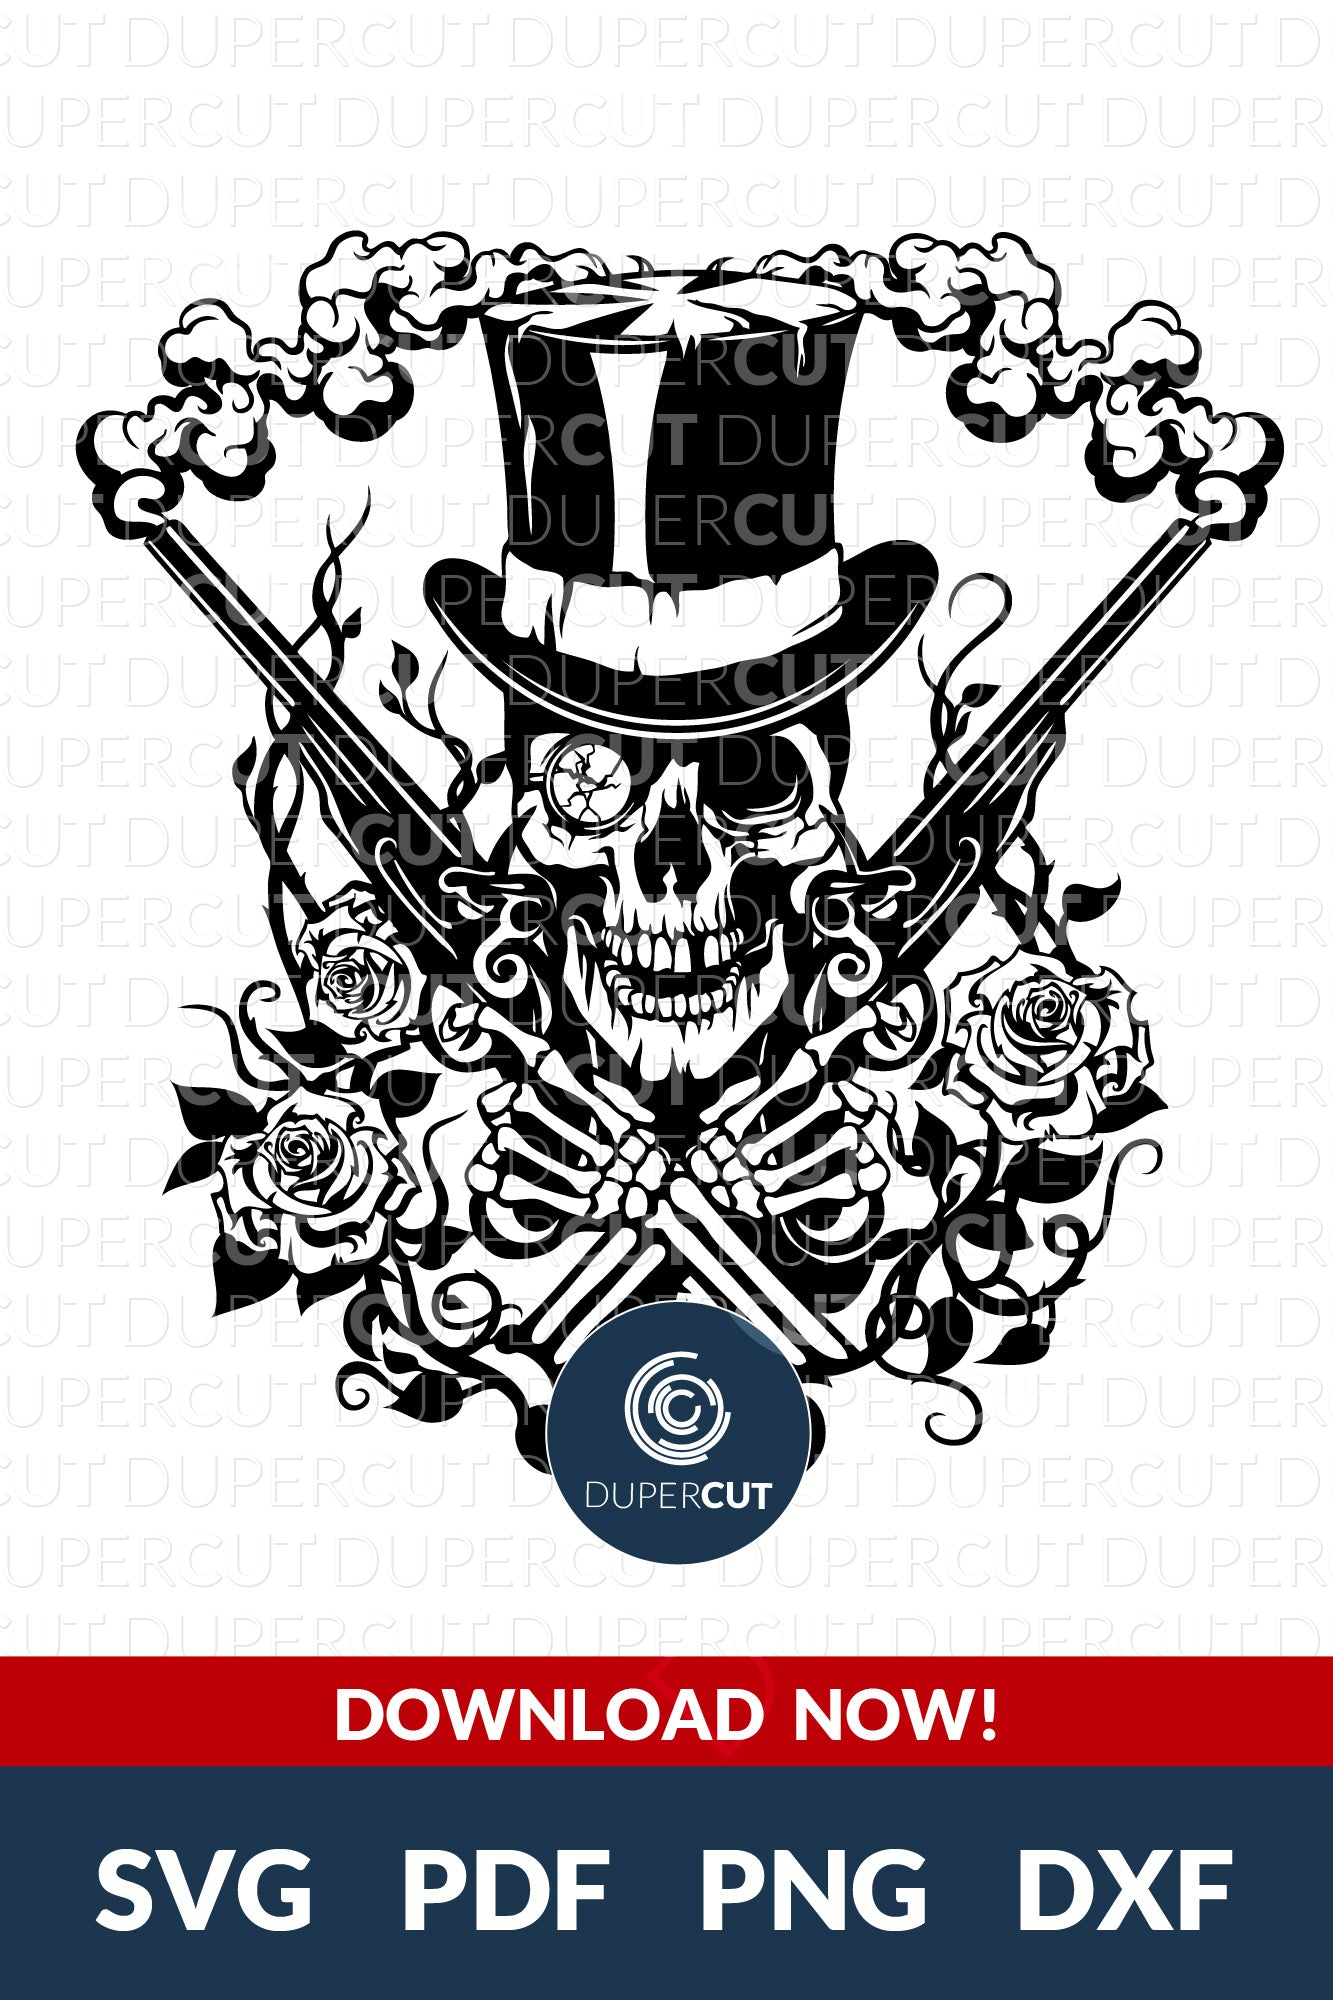 Arms crossed skull with pistols. Hand drawn tattoo. Papercutting template for commercial use. SVG files for Silhouette Cameo, Cricut, Glowforge, DXF for CNC, laser cutting, print on demand